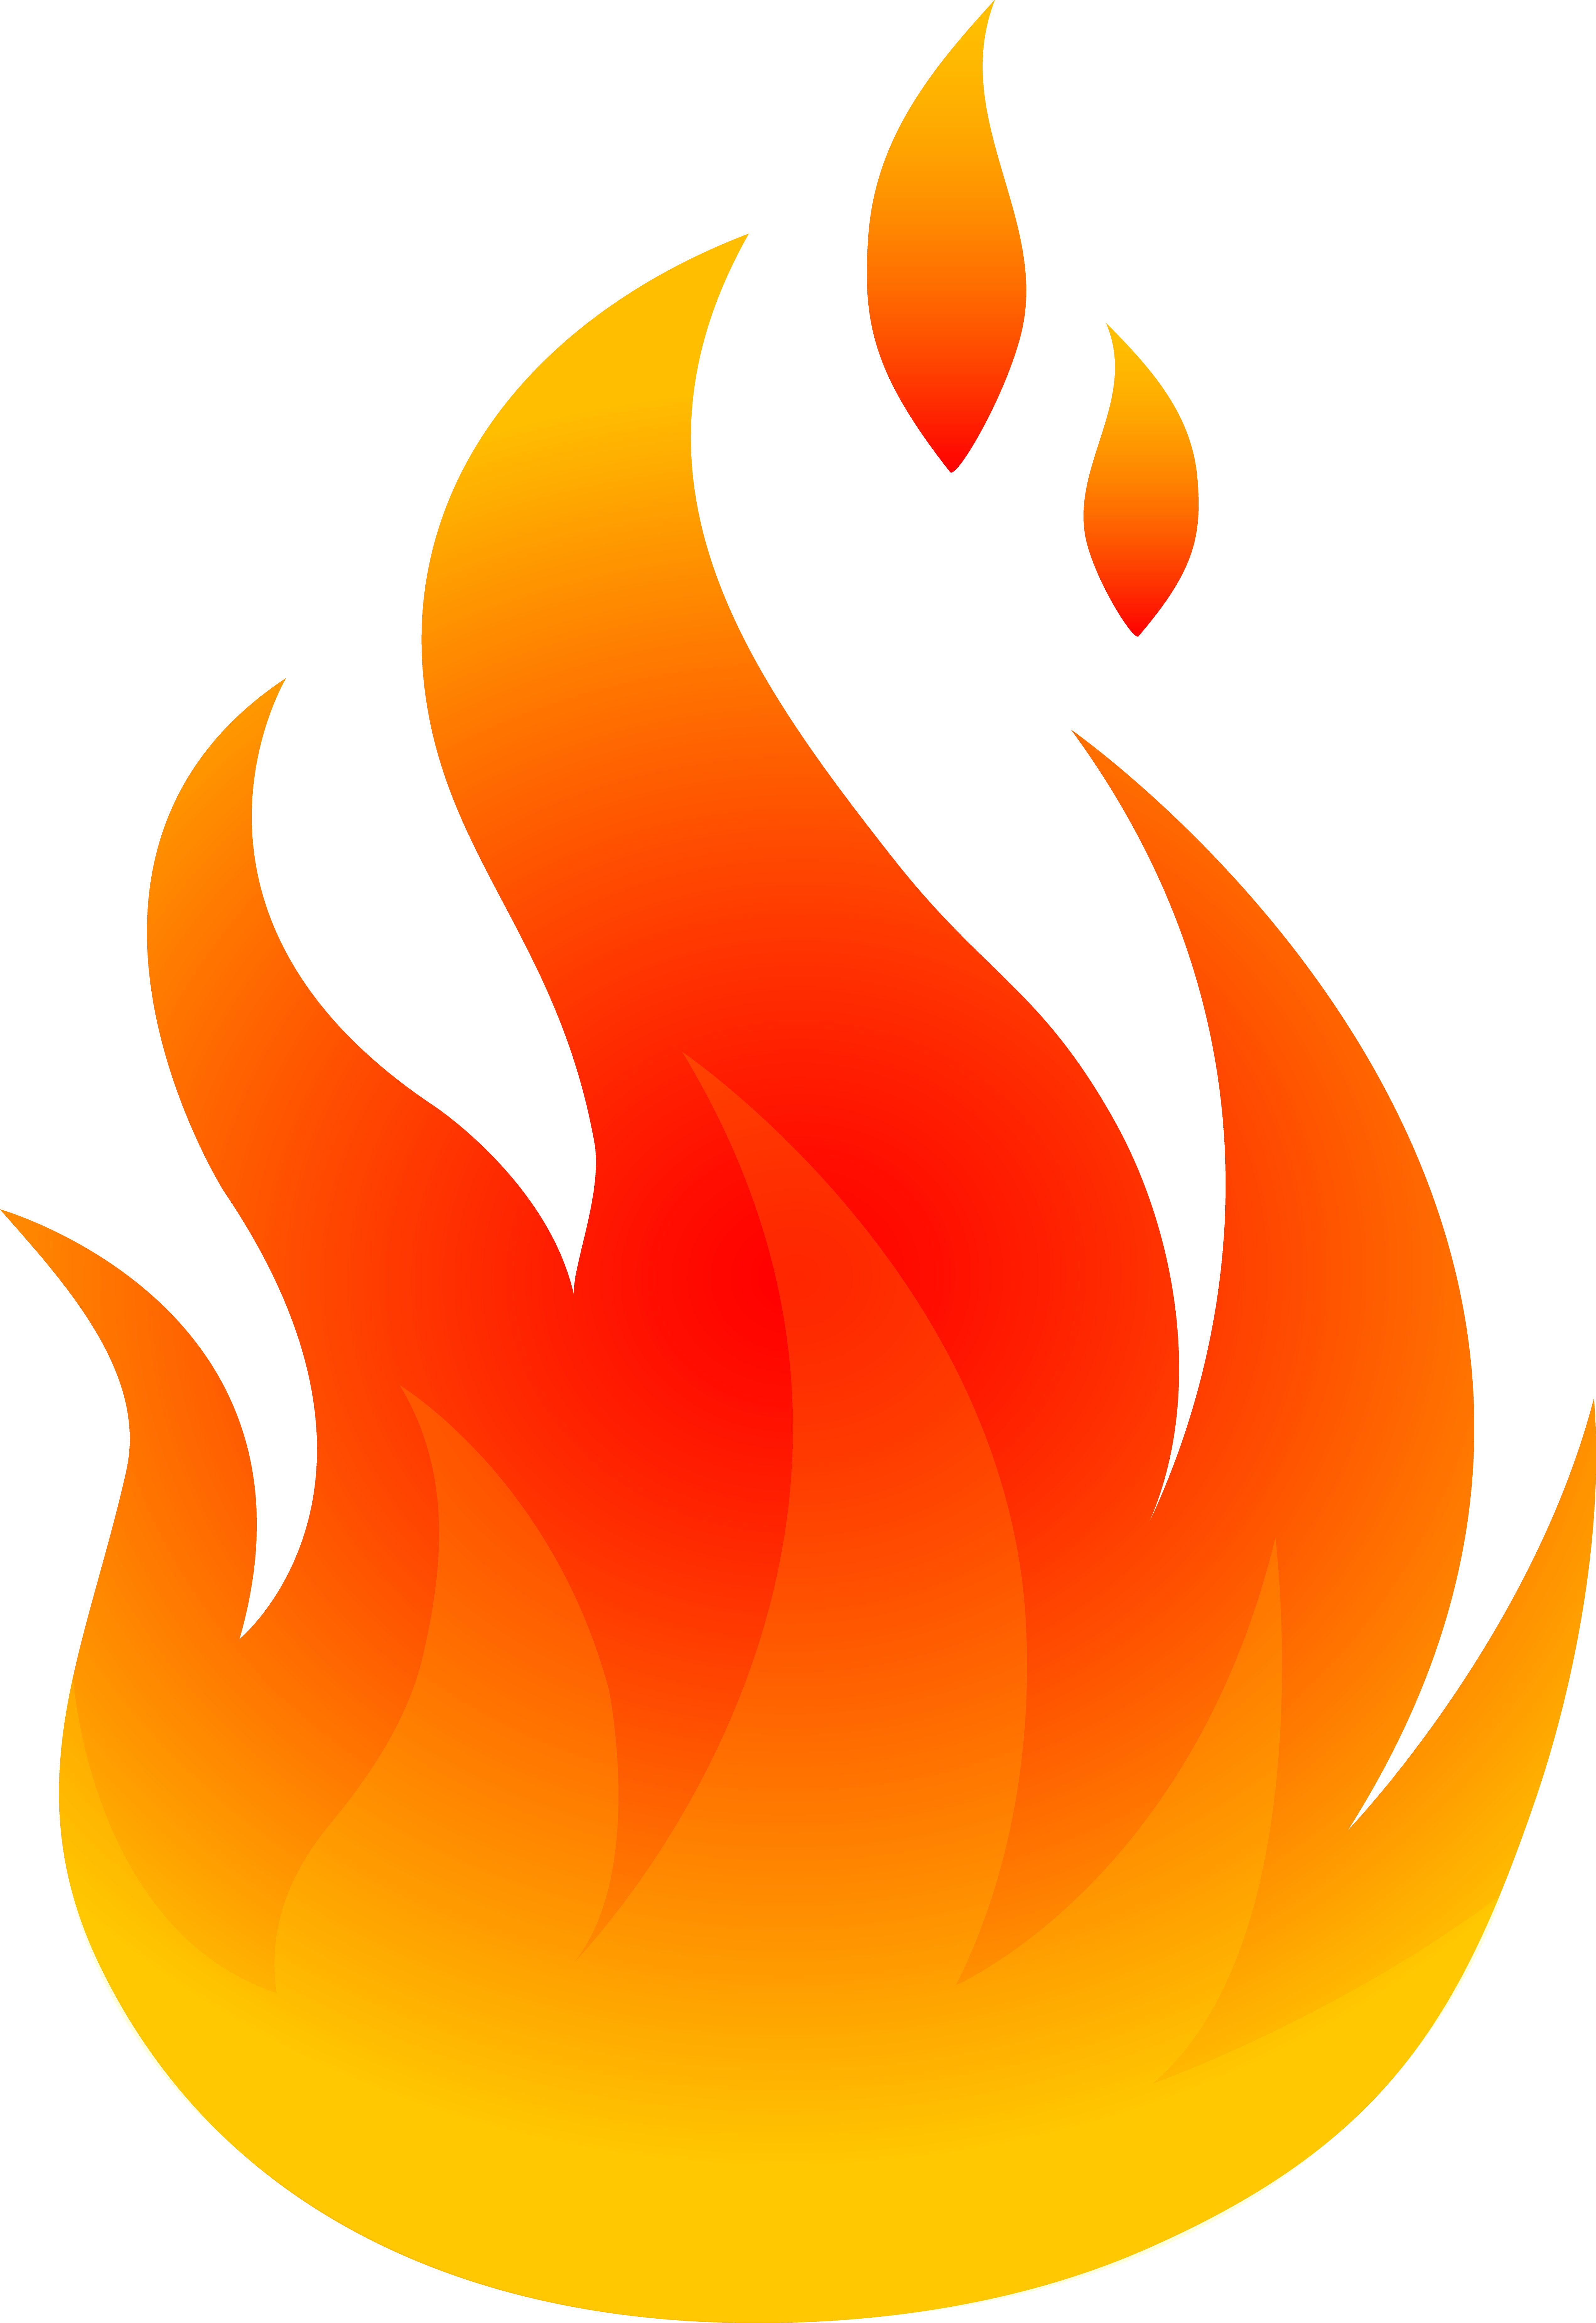 How To Draw Cartoon Fire Flames | Clipart Panda - Free Clipart Images